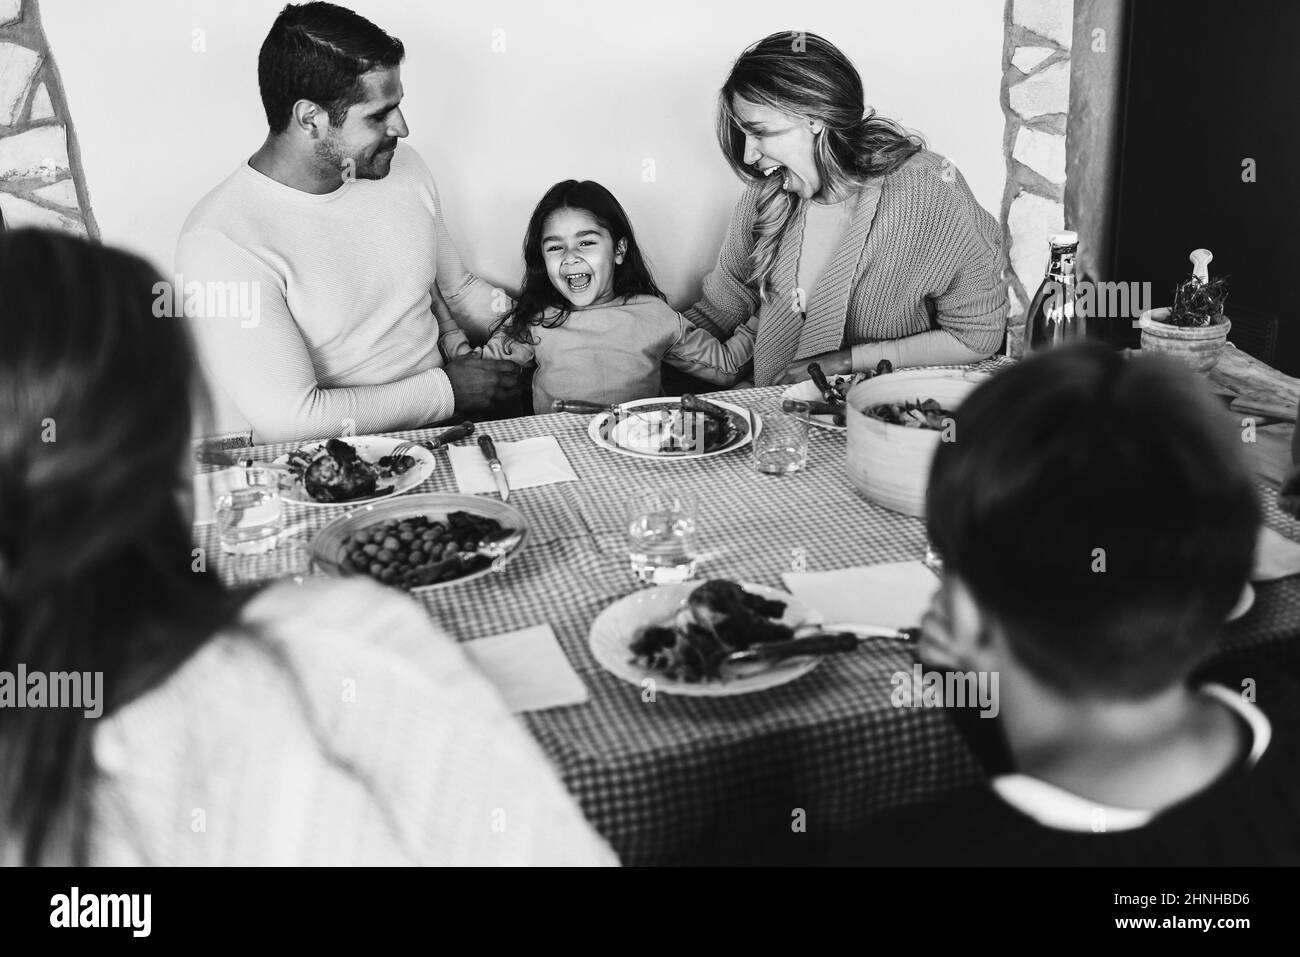 Latin mother and father having fun with their daughter during home dinner - Focus on child face - Black and white editing Stock Photo